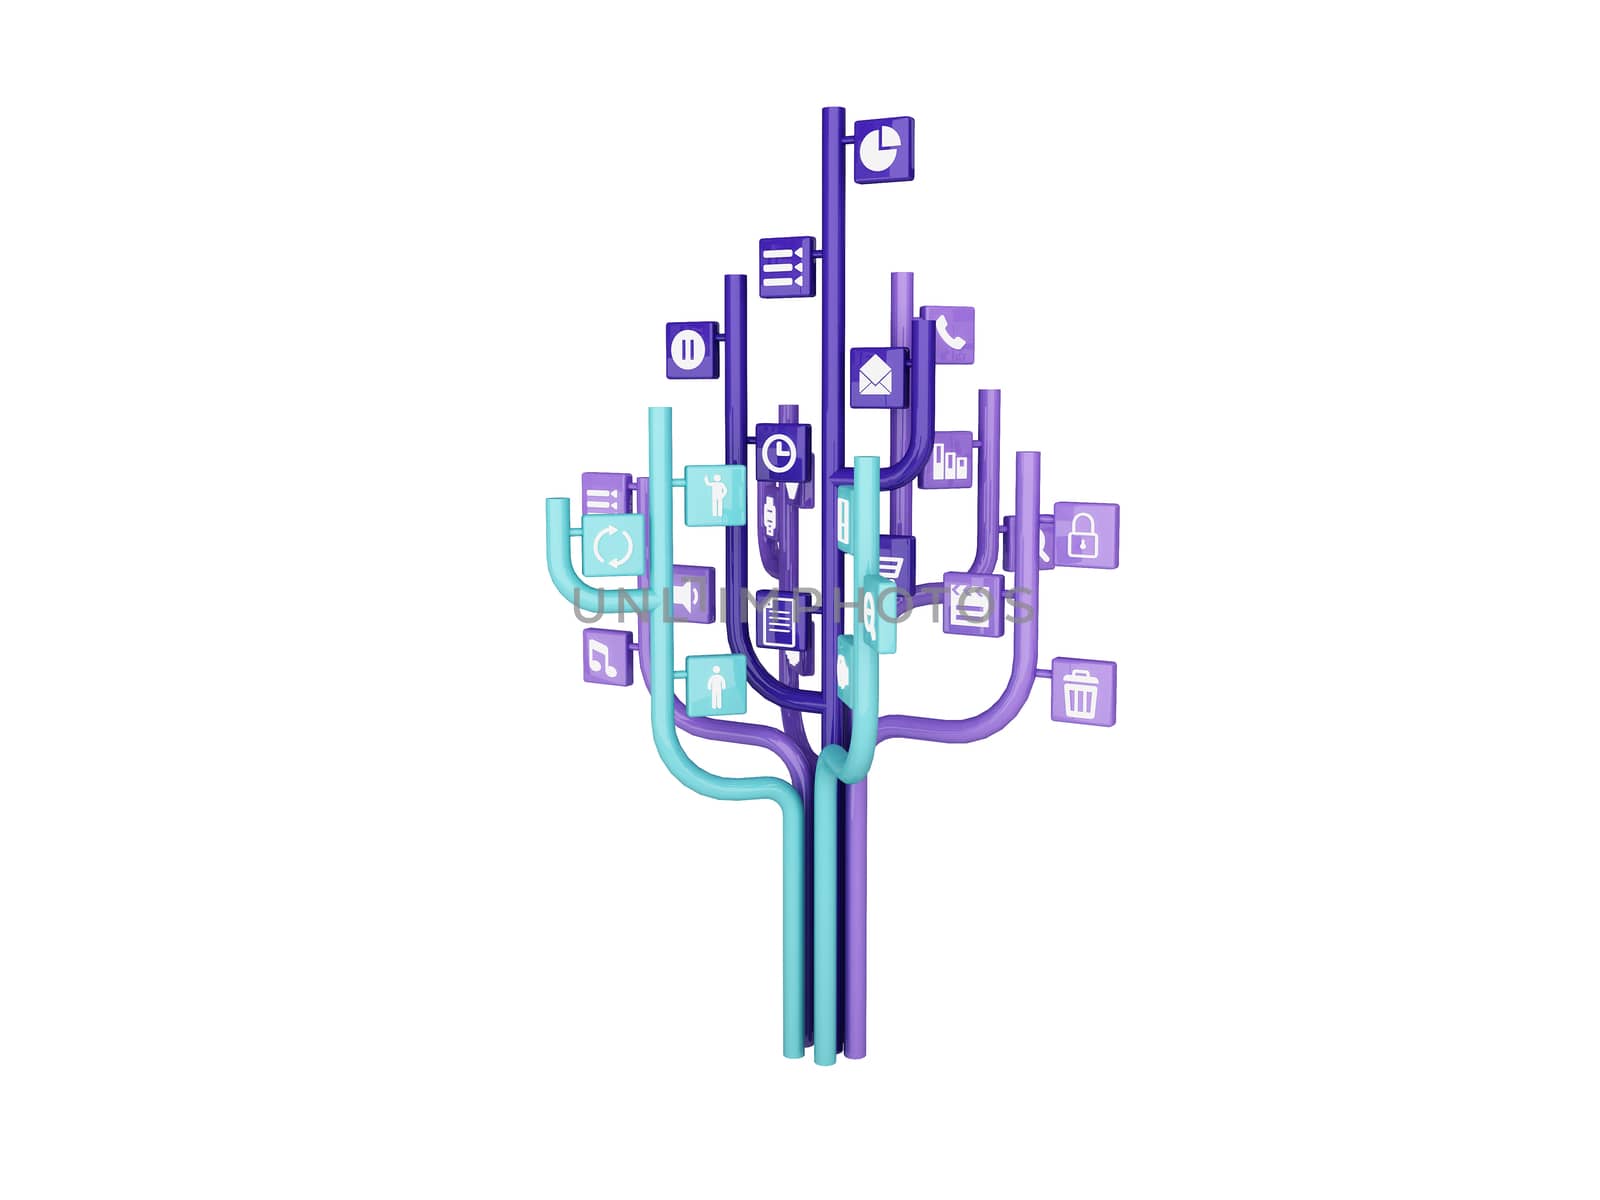 the tree consisting of the icons on the topic of social media by teerawit